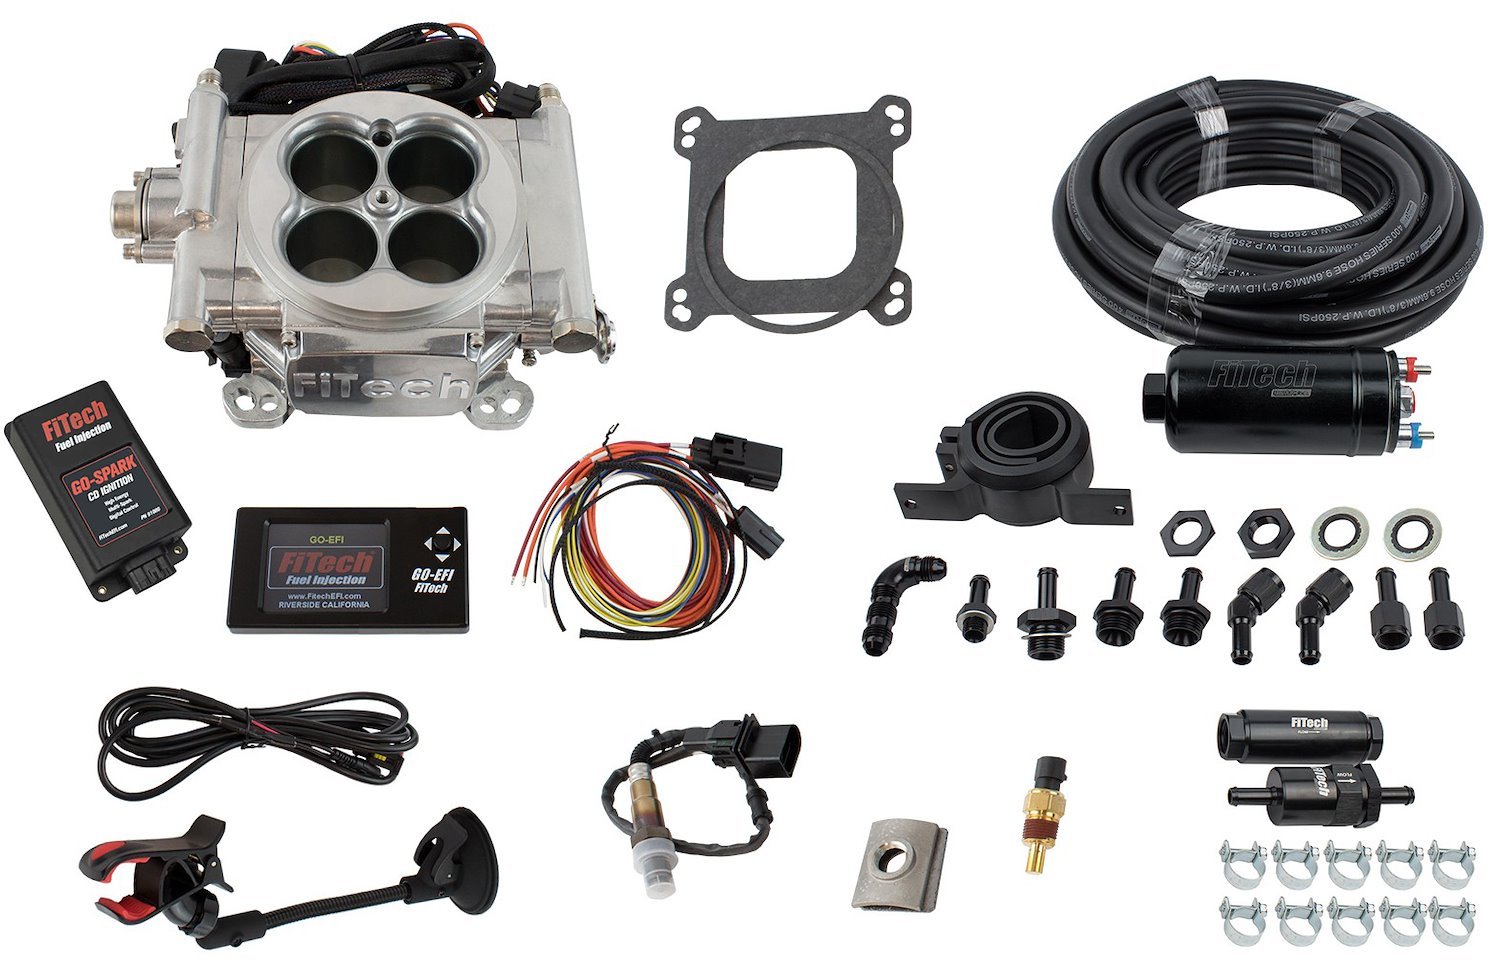 Go EFI-4 600 HP Throttle Body Fuel Injection Master Kit [In-line Fuel Pump and CDI Box] Bright Aluminum